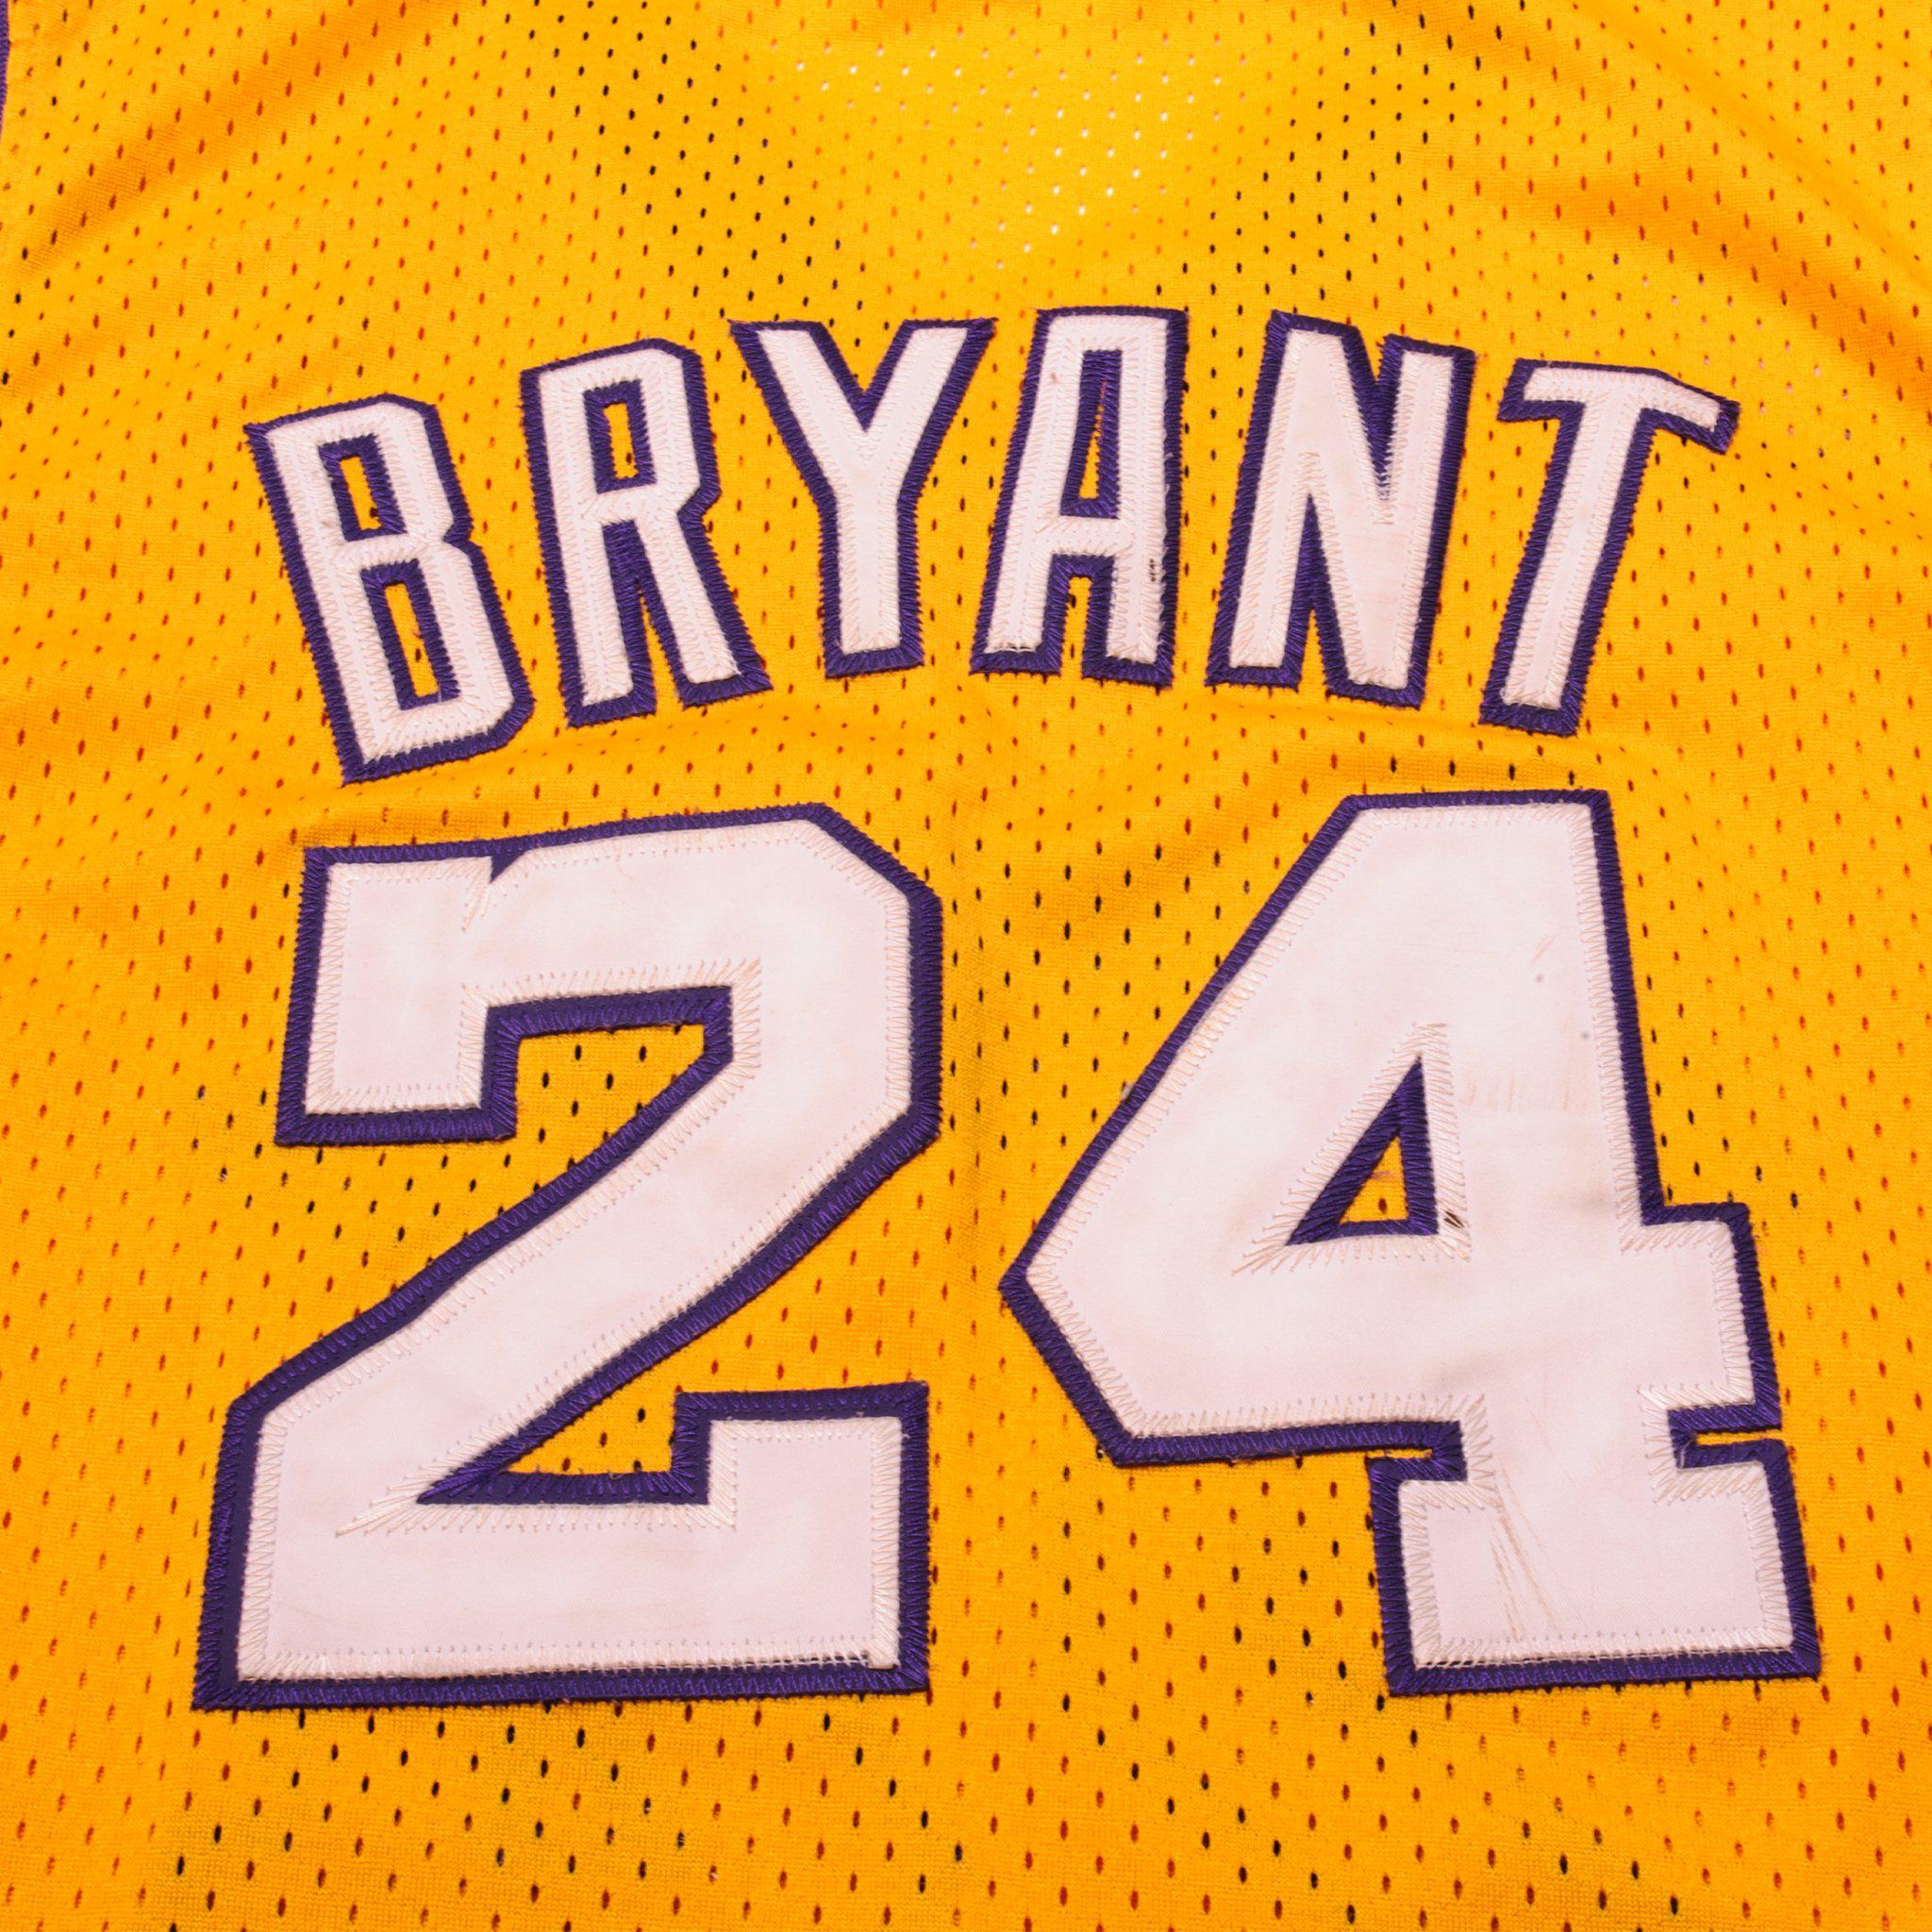 Kobe Bryant The Finals Adidas Authentic Jersey size 48 purple gold